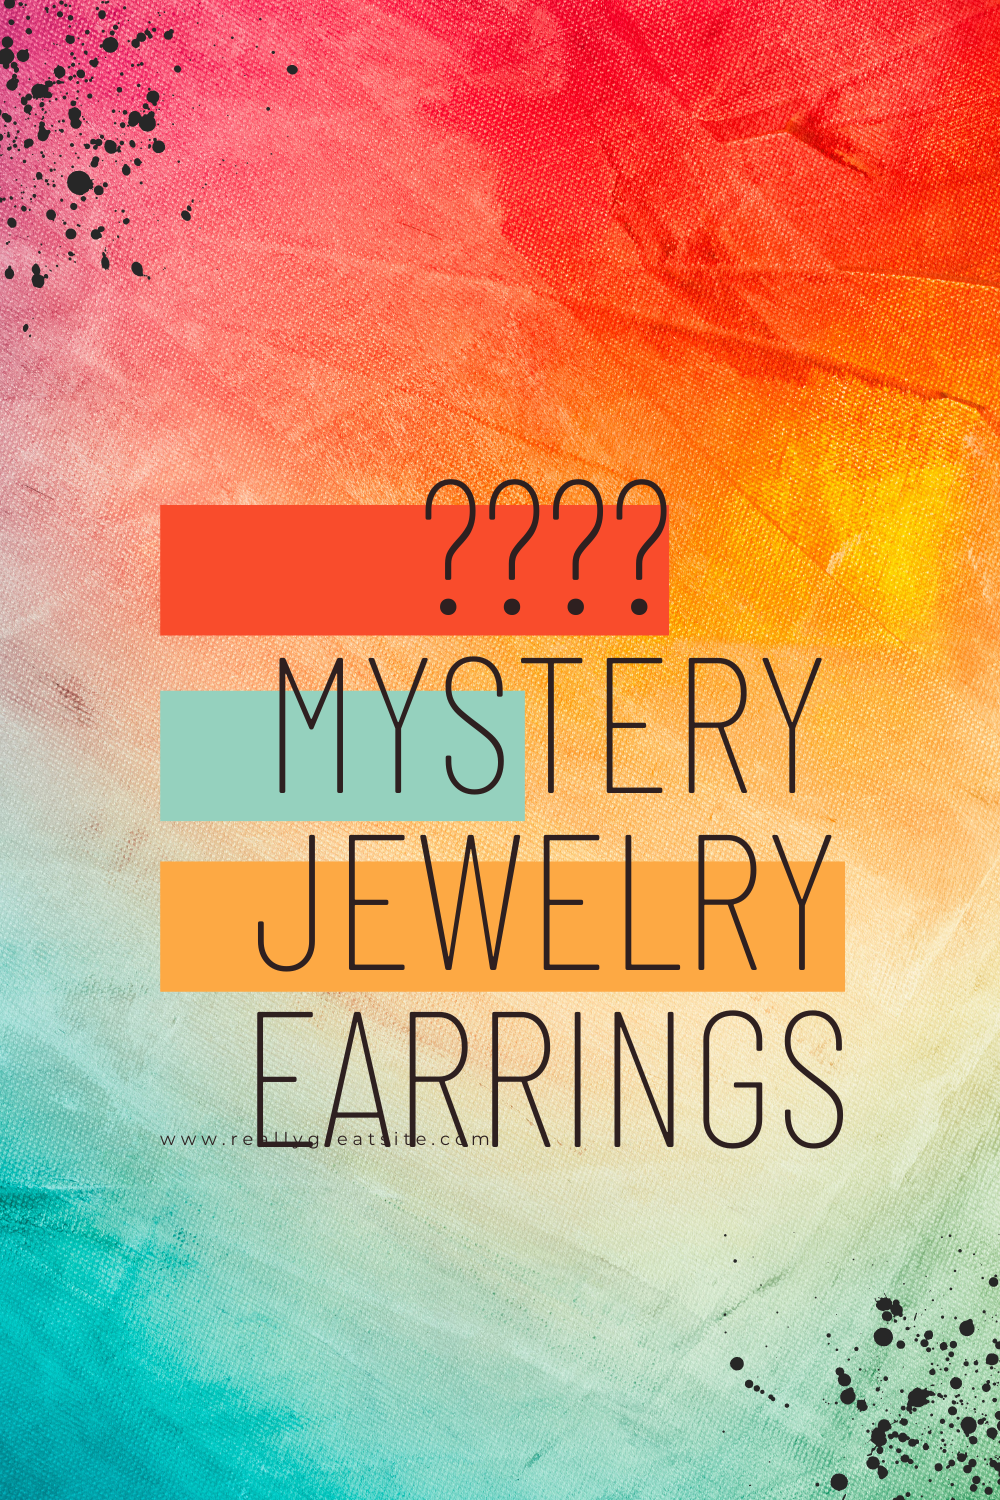 Mystery Jewelry TIkTok/FB Fashion Earrings or you pick by number